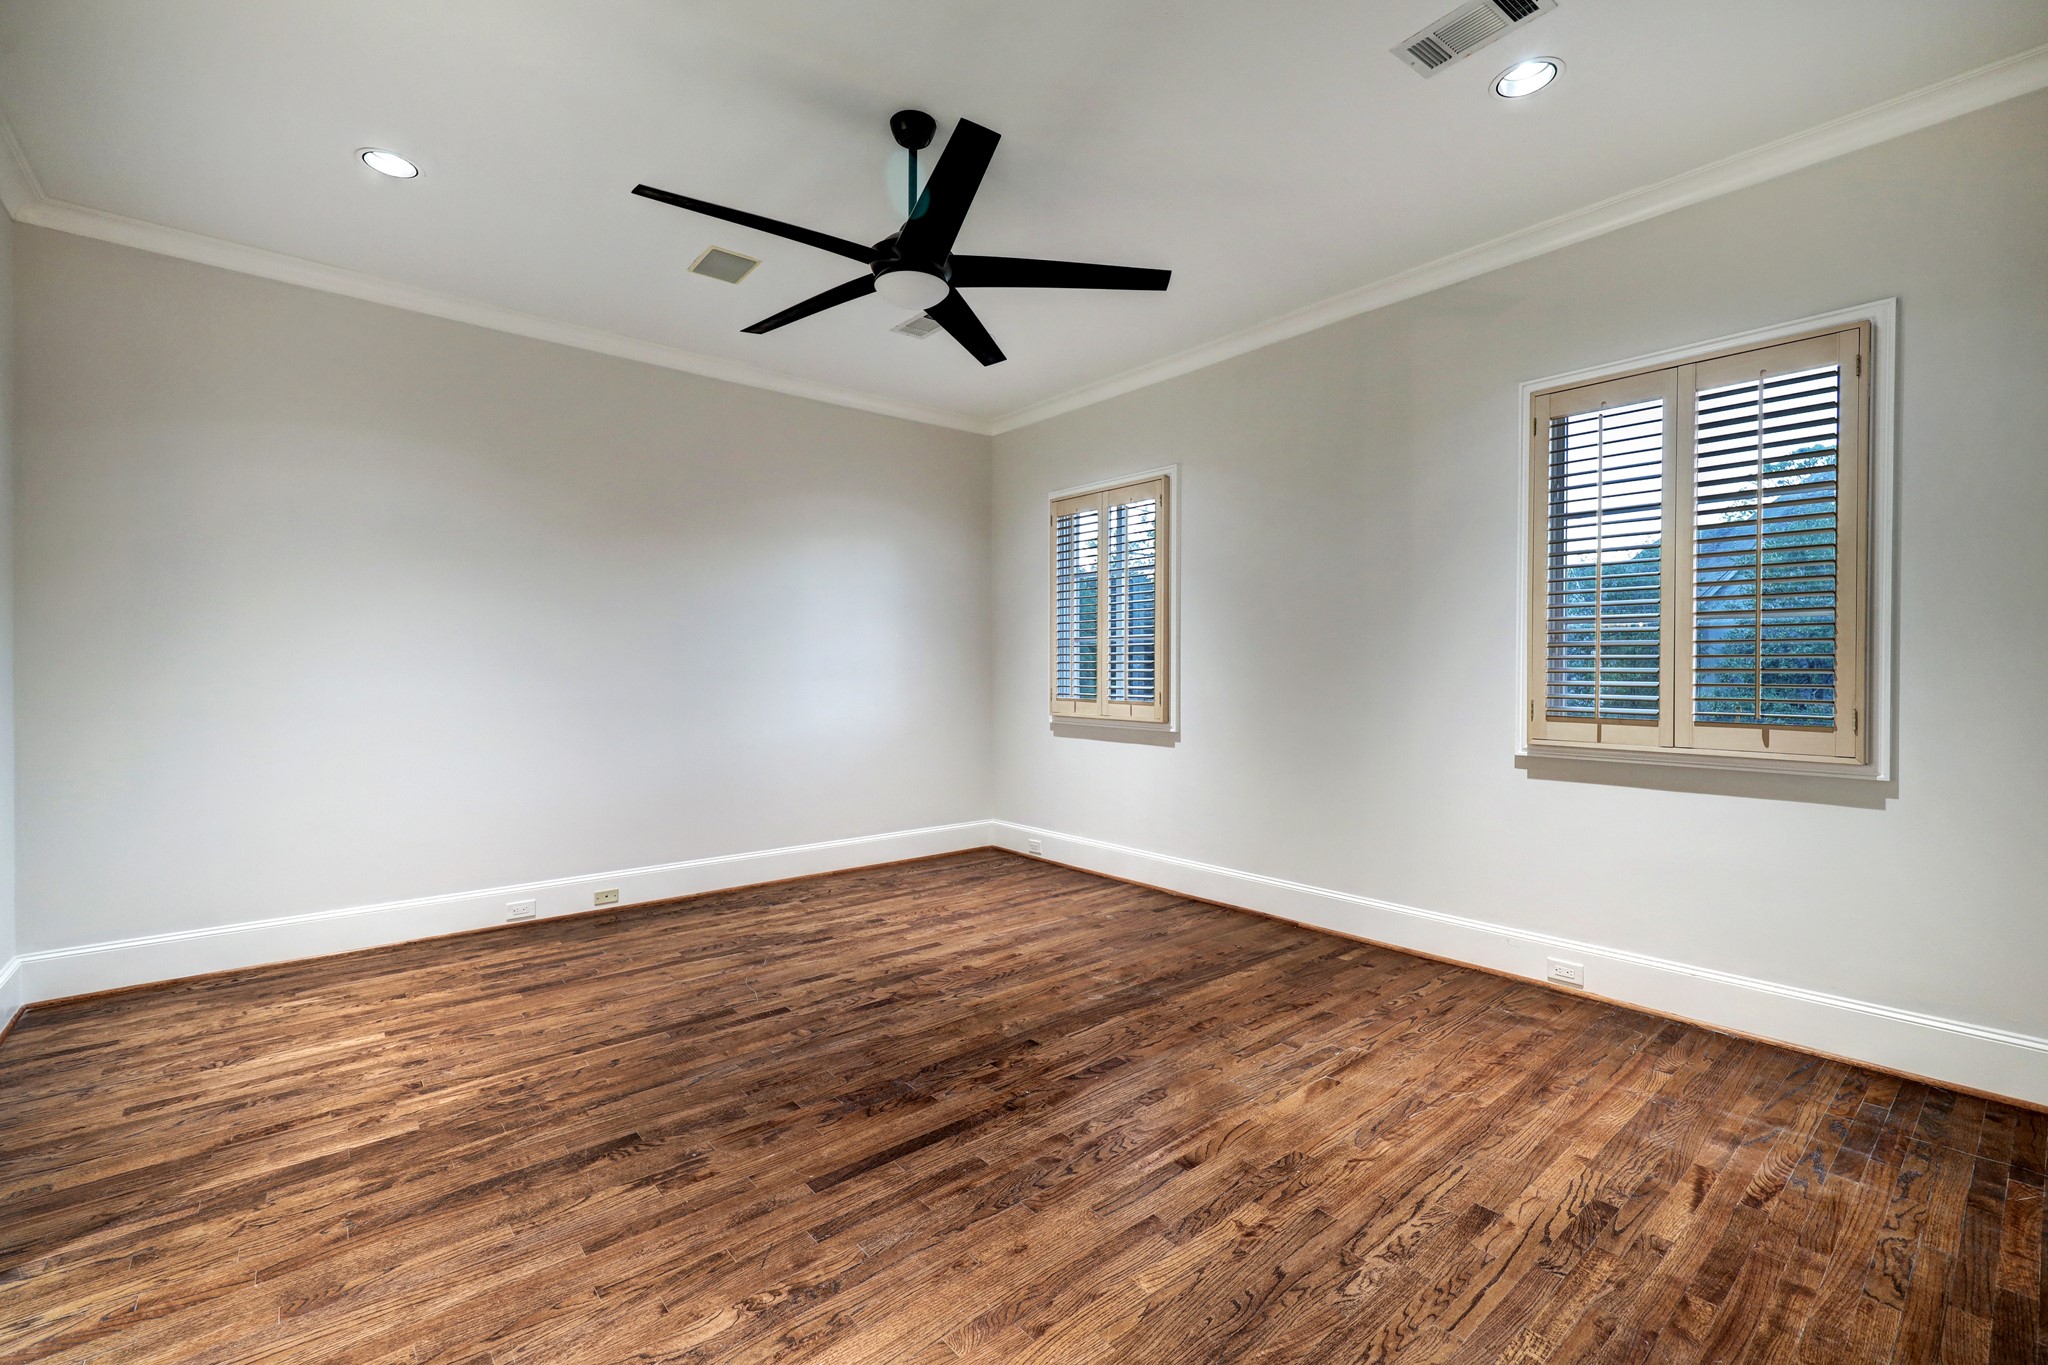 This Secondary Bedroom features wood floors, crown molding & baseboards, windows with plantation shutters and an en-suite bathroom with walk-in closet.